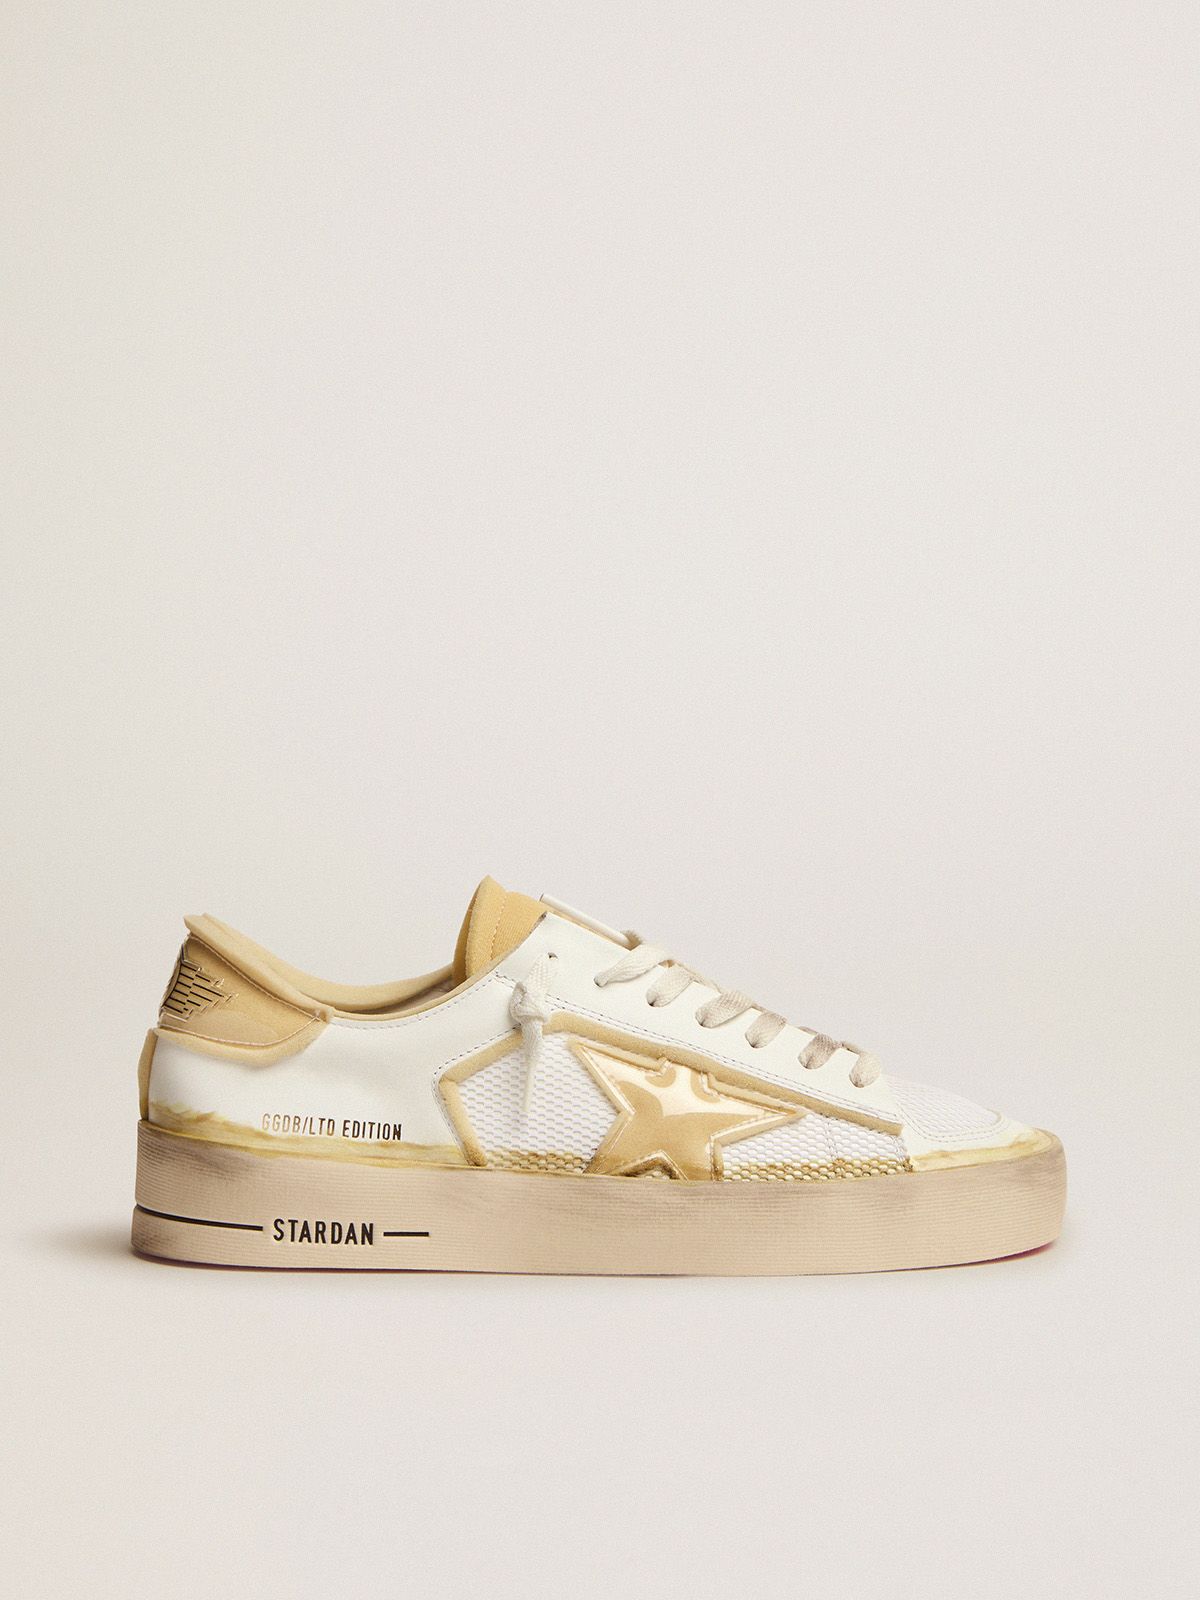 golden goose LAB with sneakers in Stardan PVC leather and white foam inserts